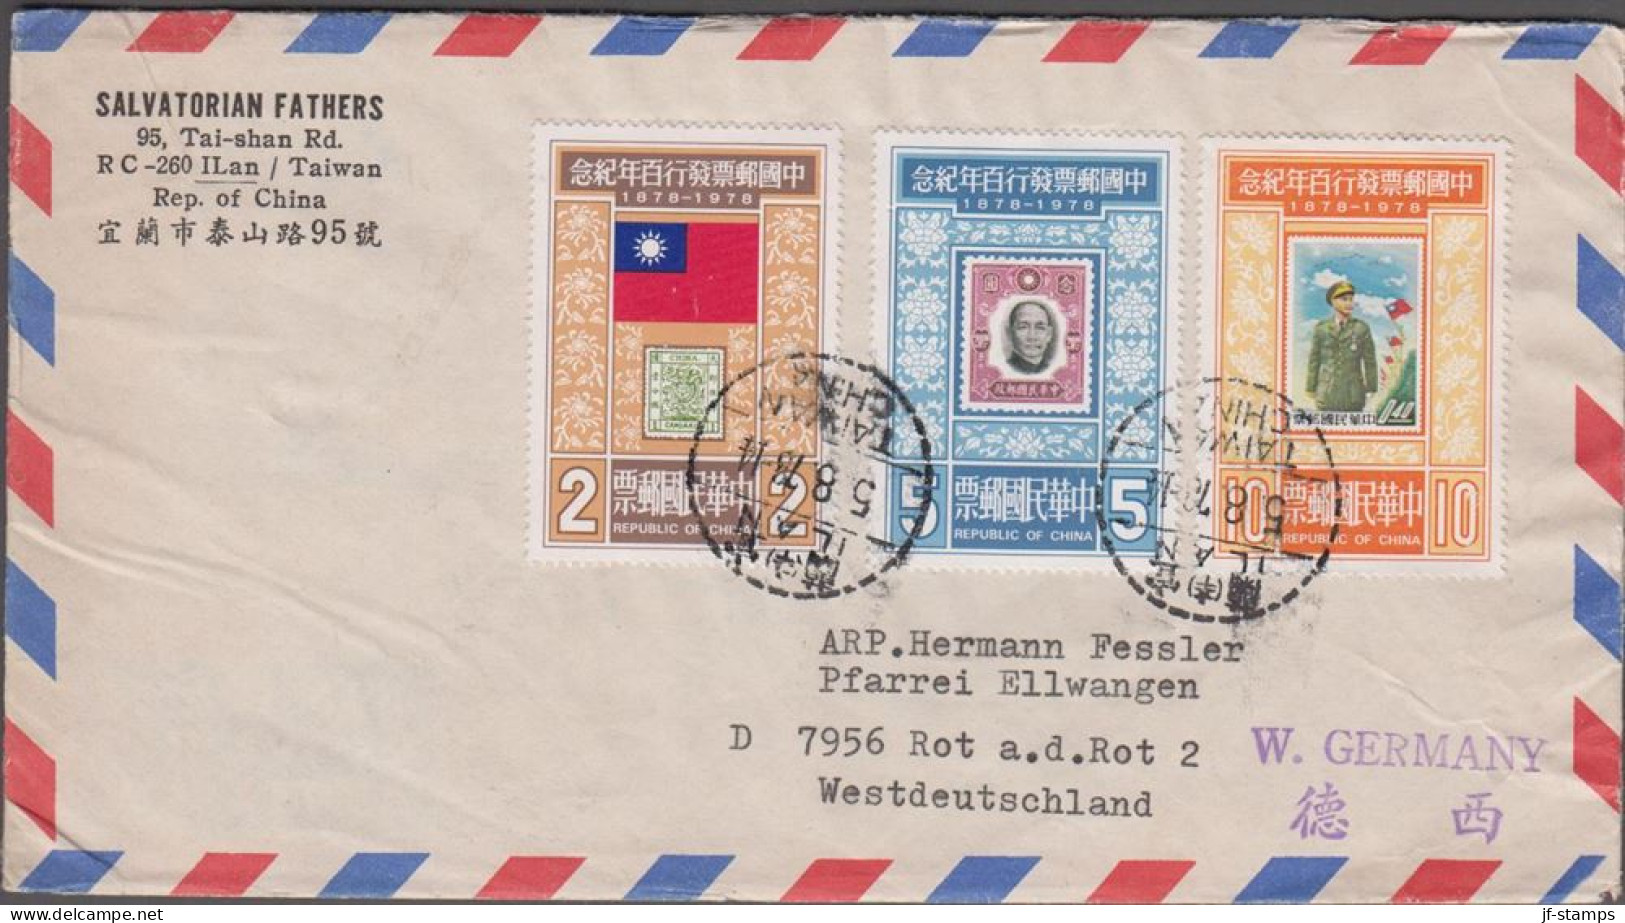 1978. TAIWAN. Complete Set 100 Years Stamps From China On Cover To Germany Cancelled TAIWAN 5 8 78. Sender... - JF524473 - Cartas & Documentos